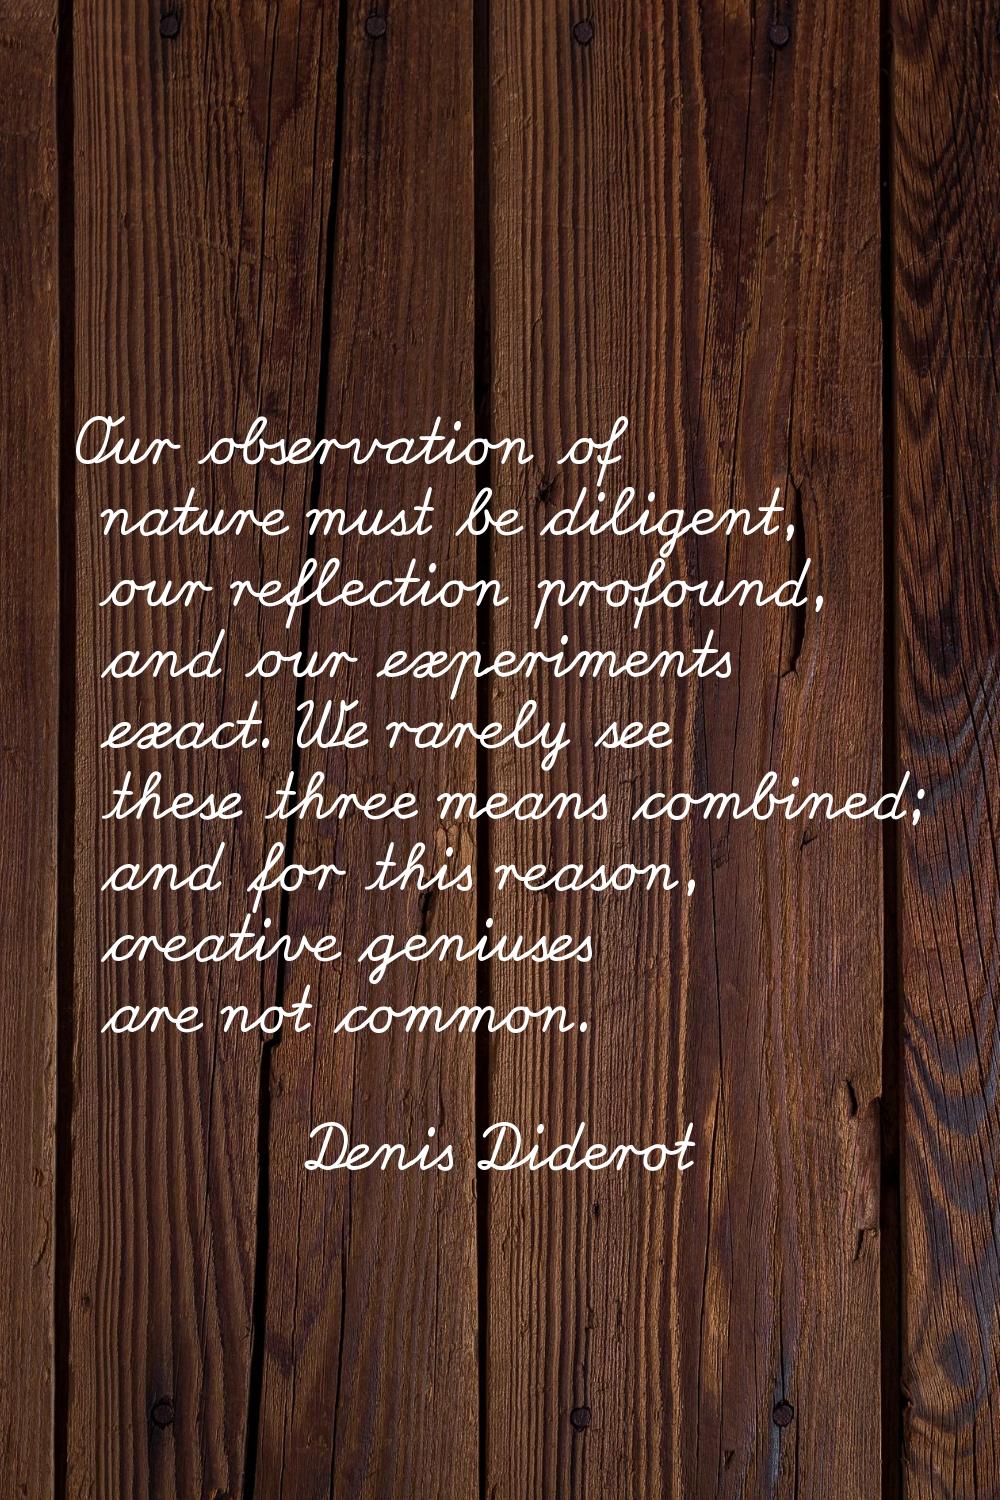 Our observation of nature must be diligent, our reflection profound, and our experiments exact. We 